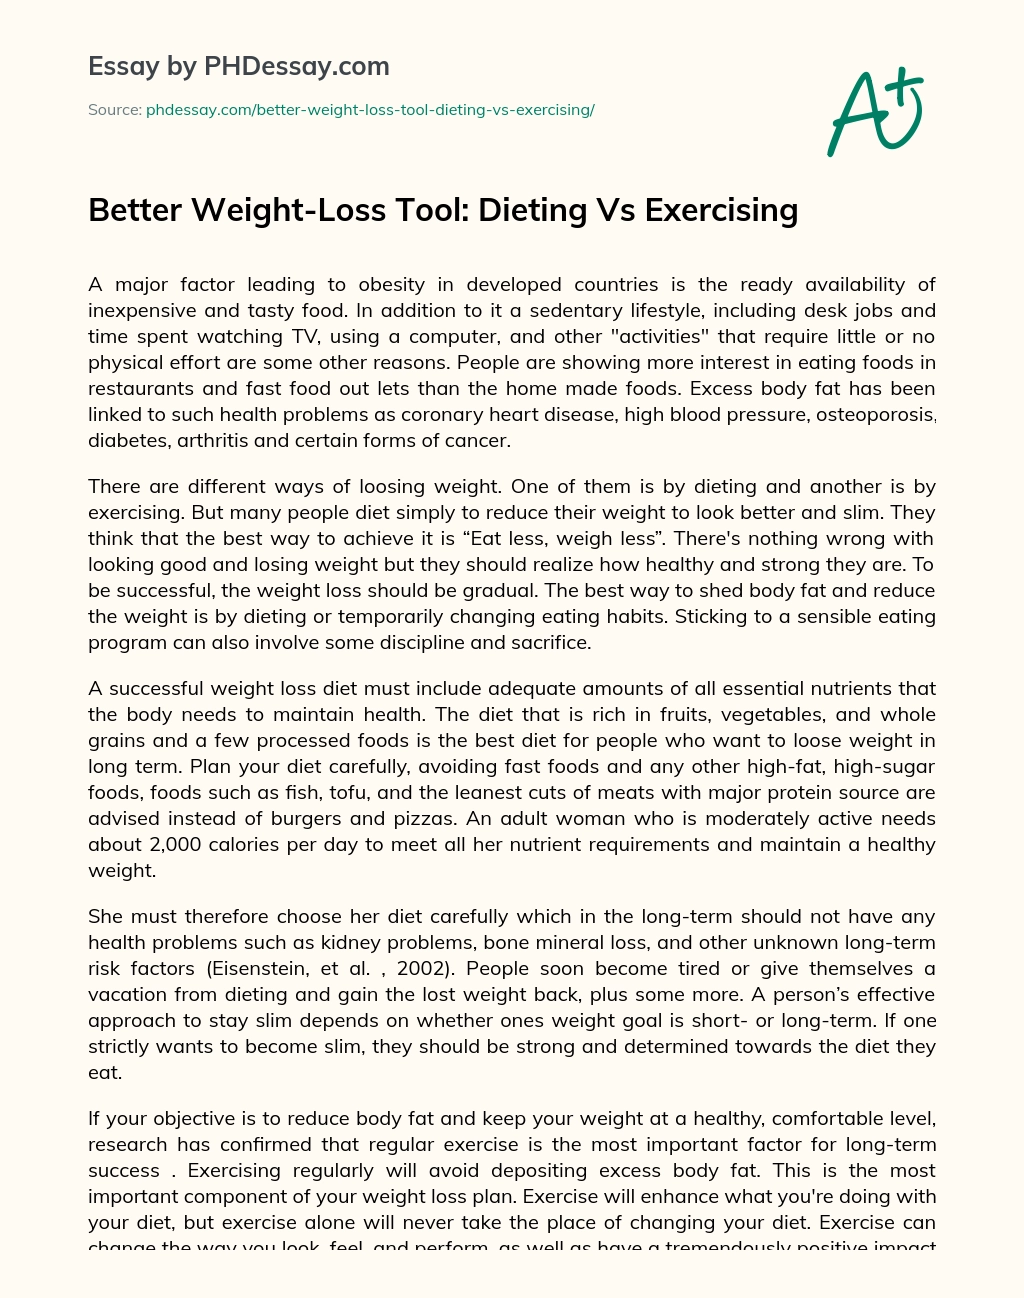 Better Weight-Loss Tool: Dieting Vs Exercising essay